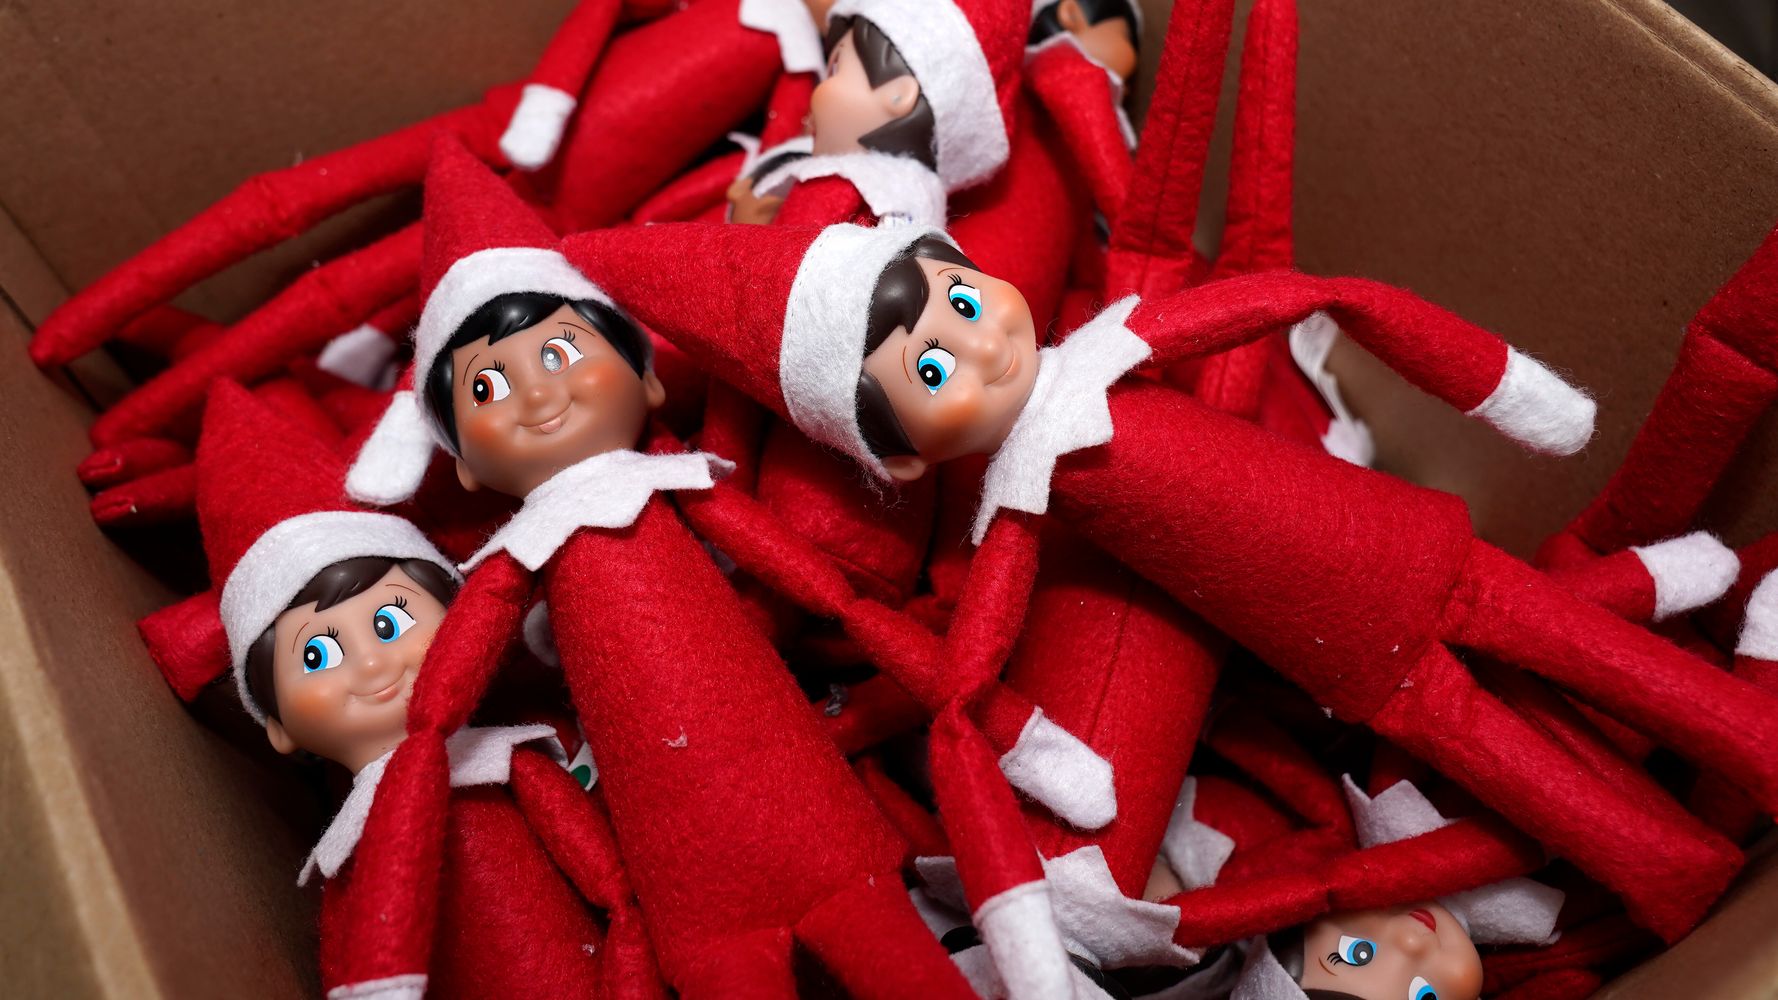 Parents, Put The Elf On The Shelf Down